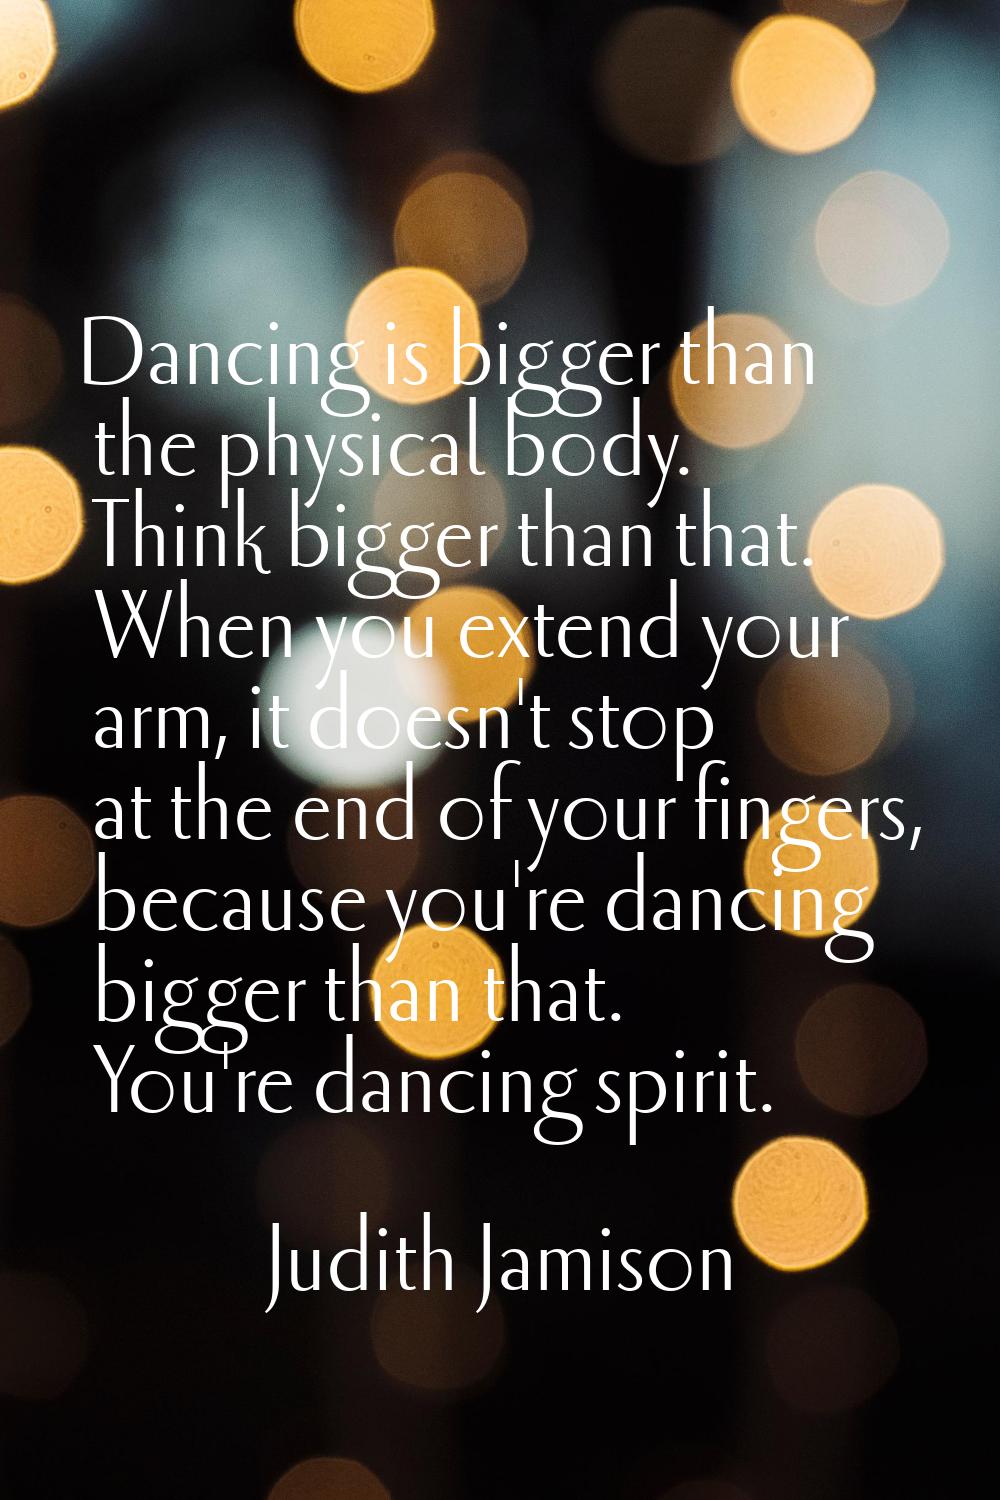 Dancing is bigger than the physical body. Think bigger than that. When you extend your arm, it does